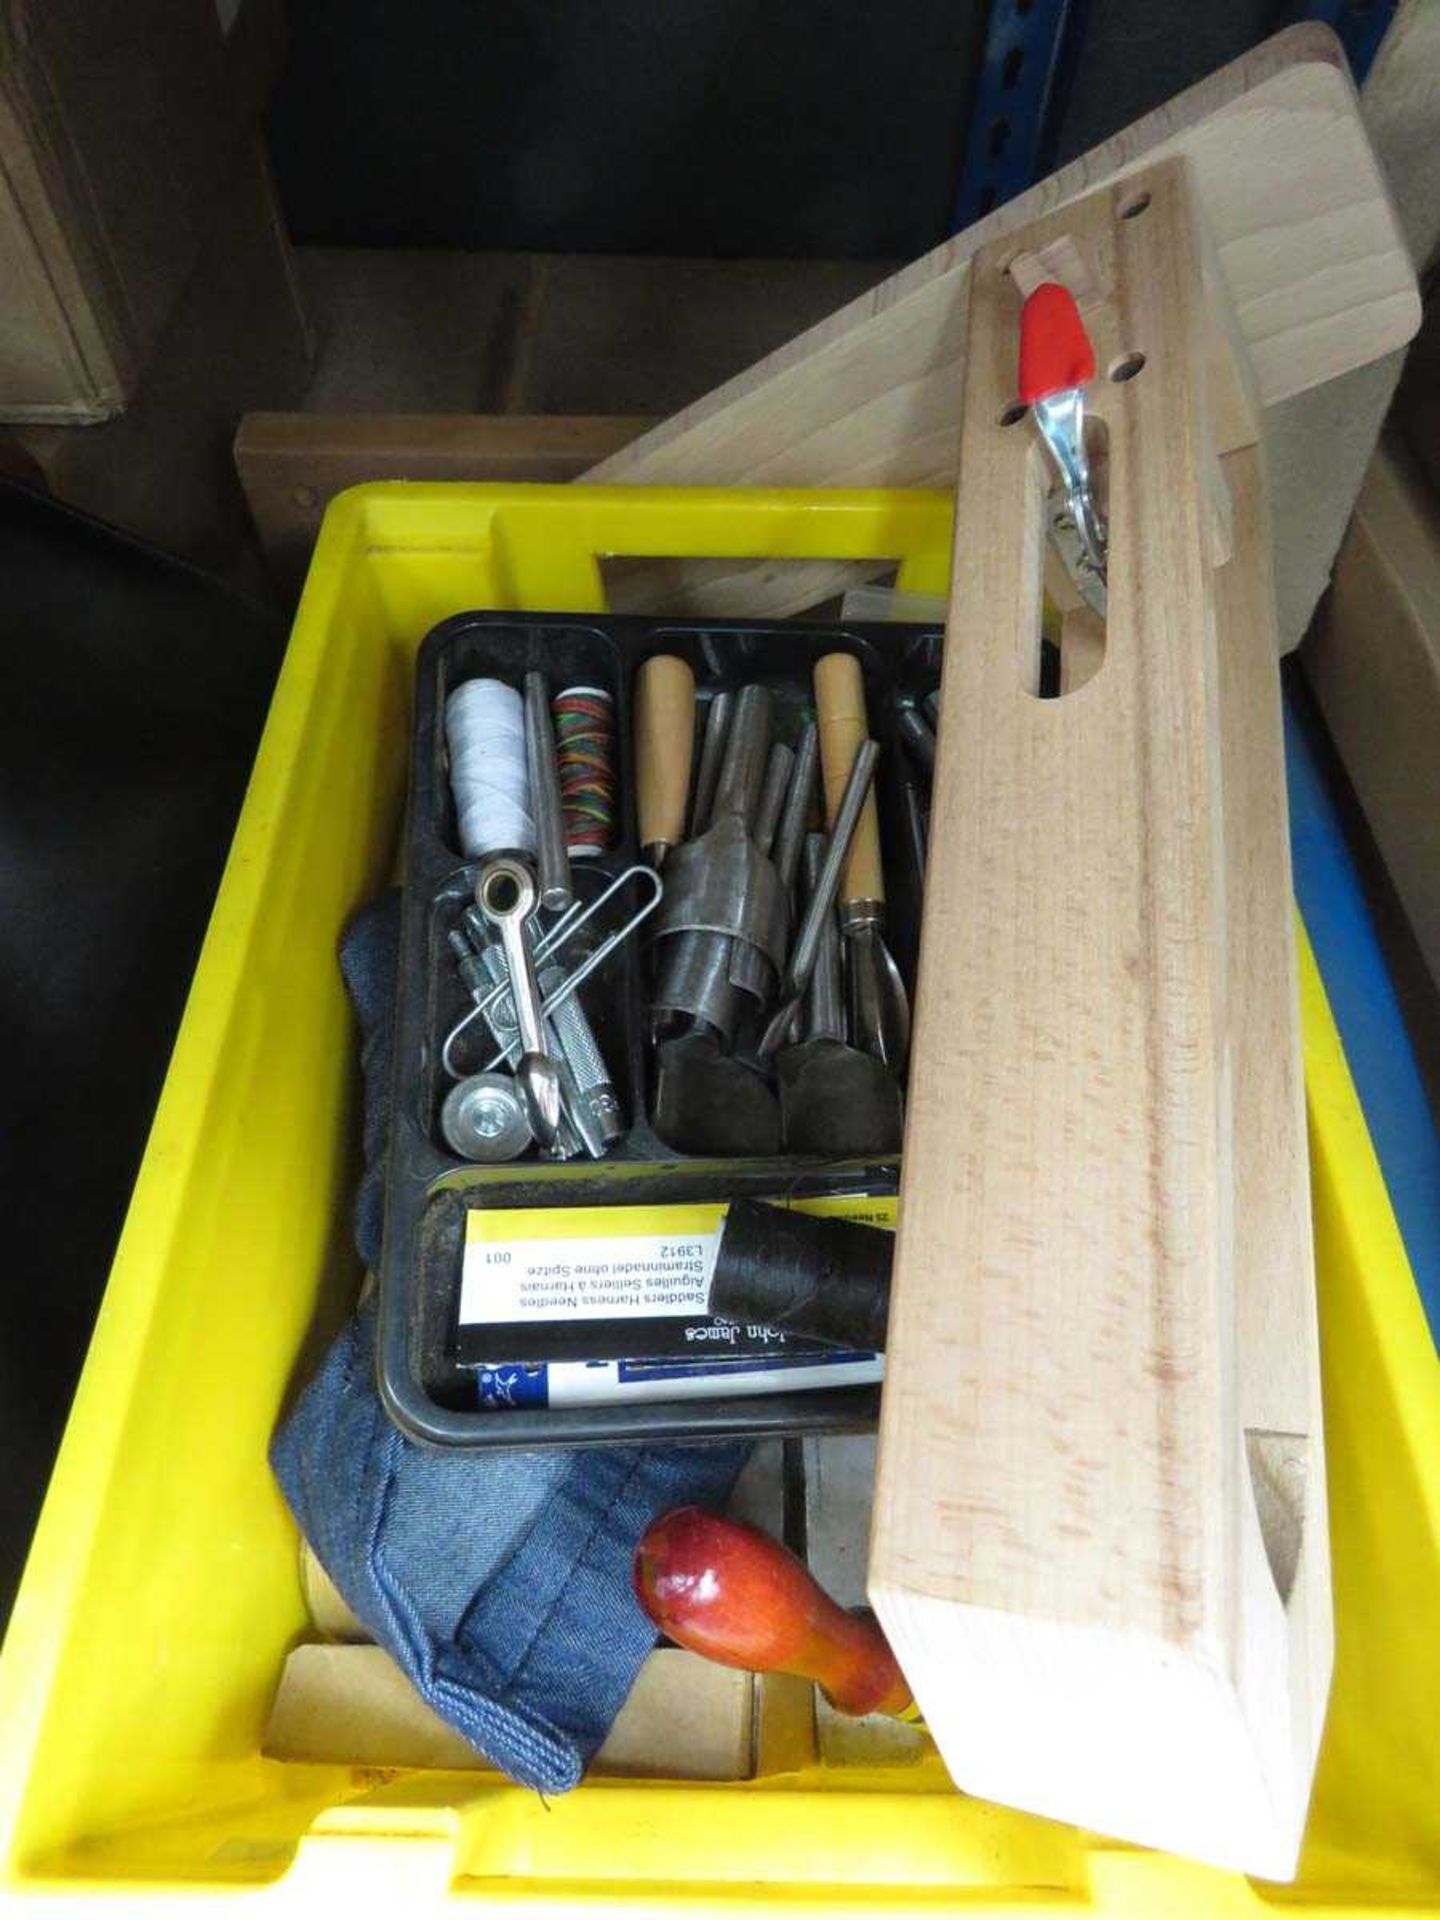 Box containing string reels, crafting tools, etc.